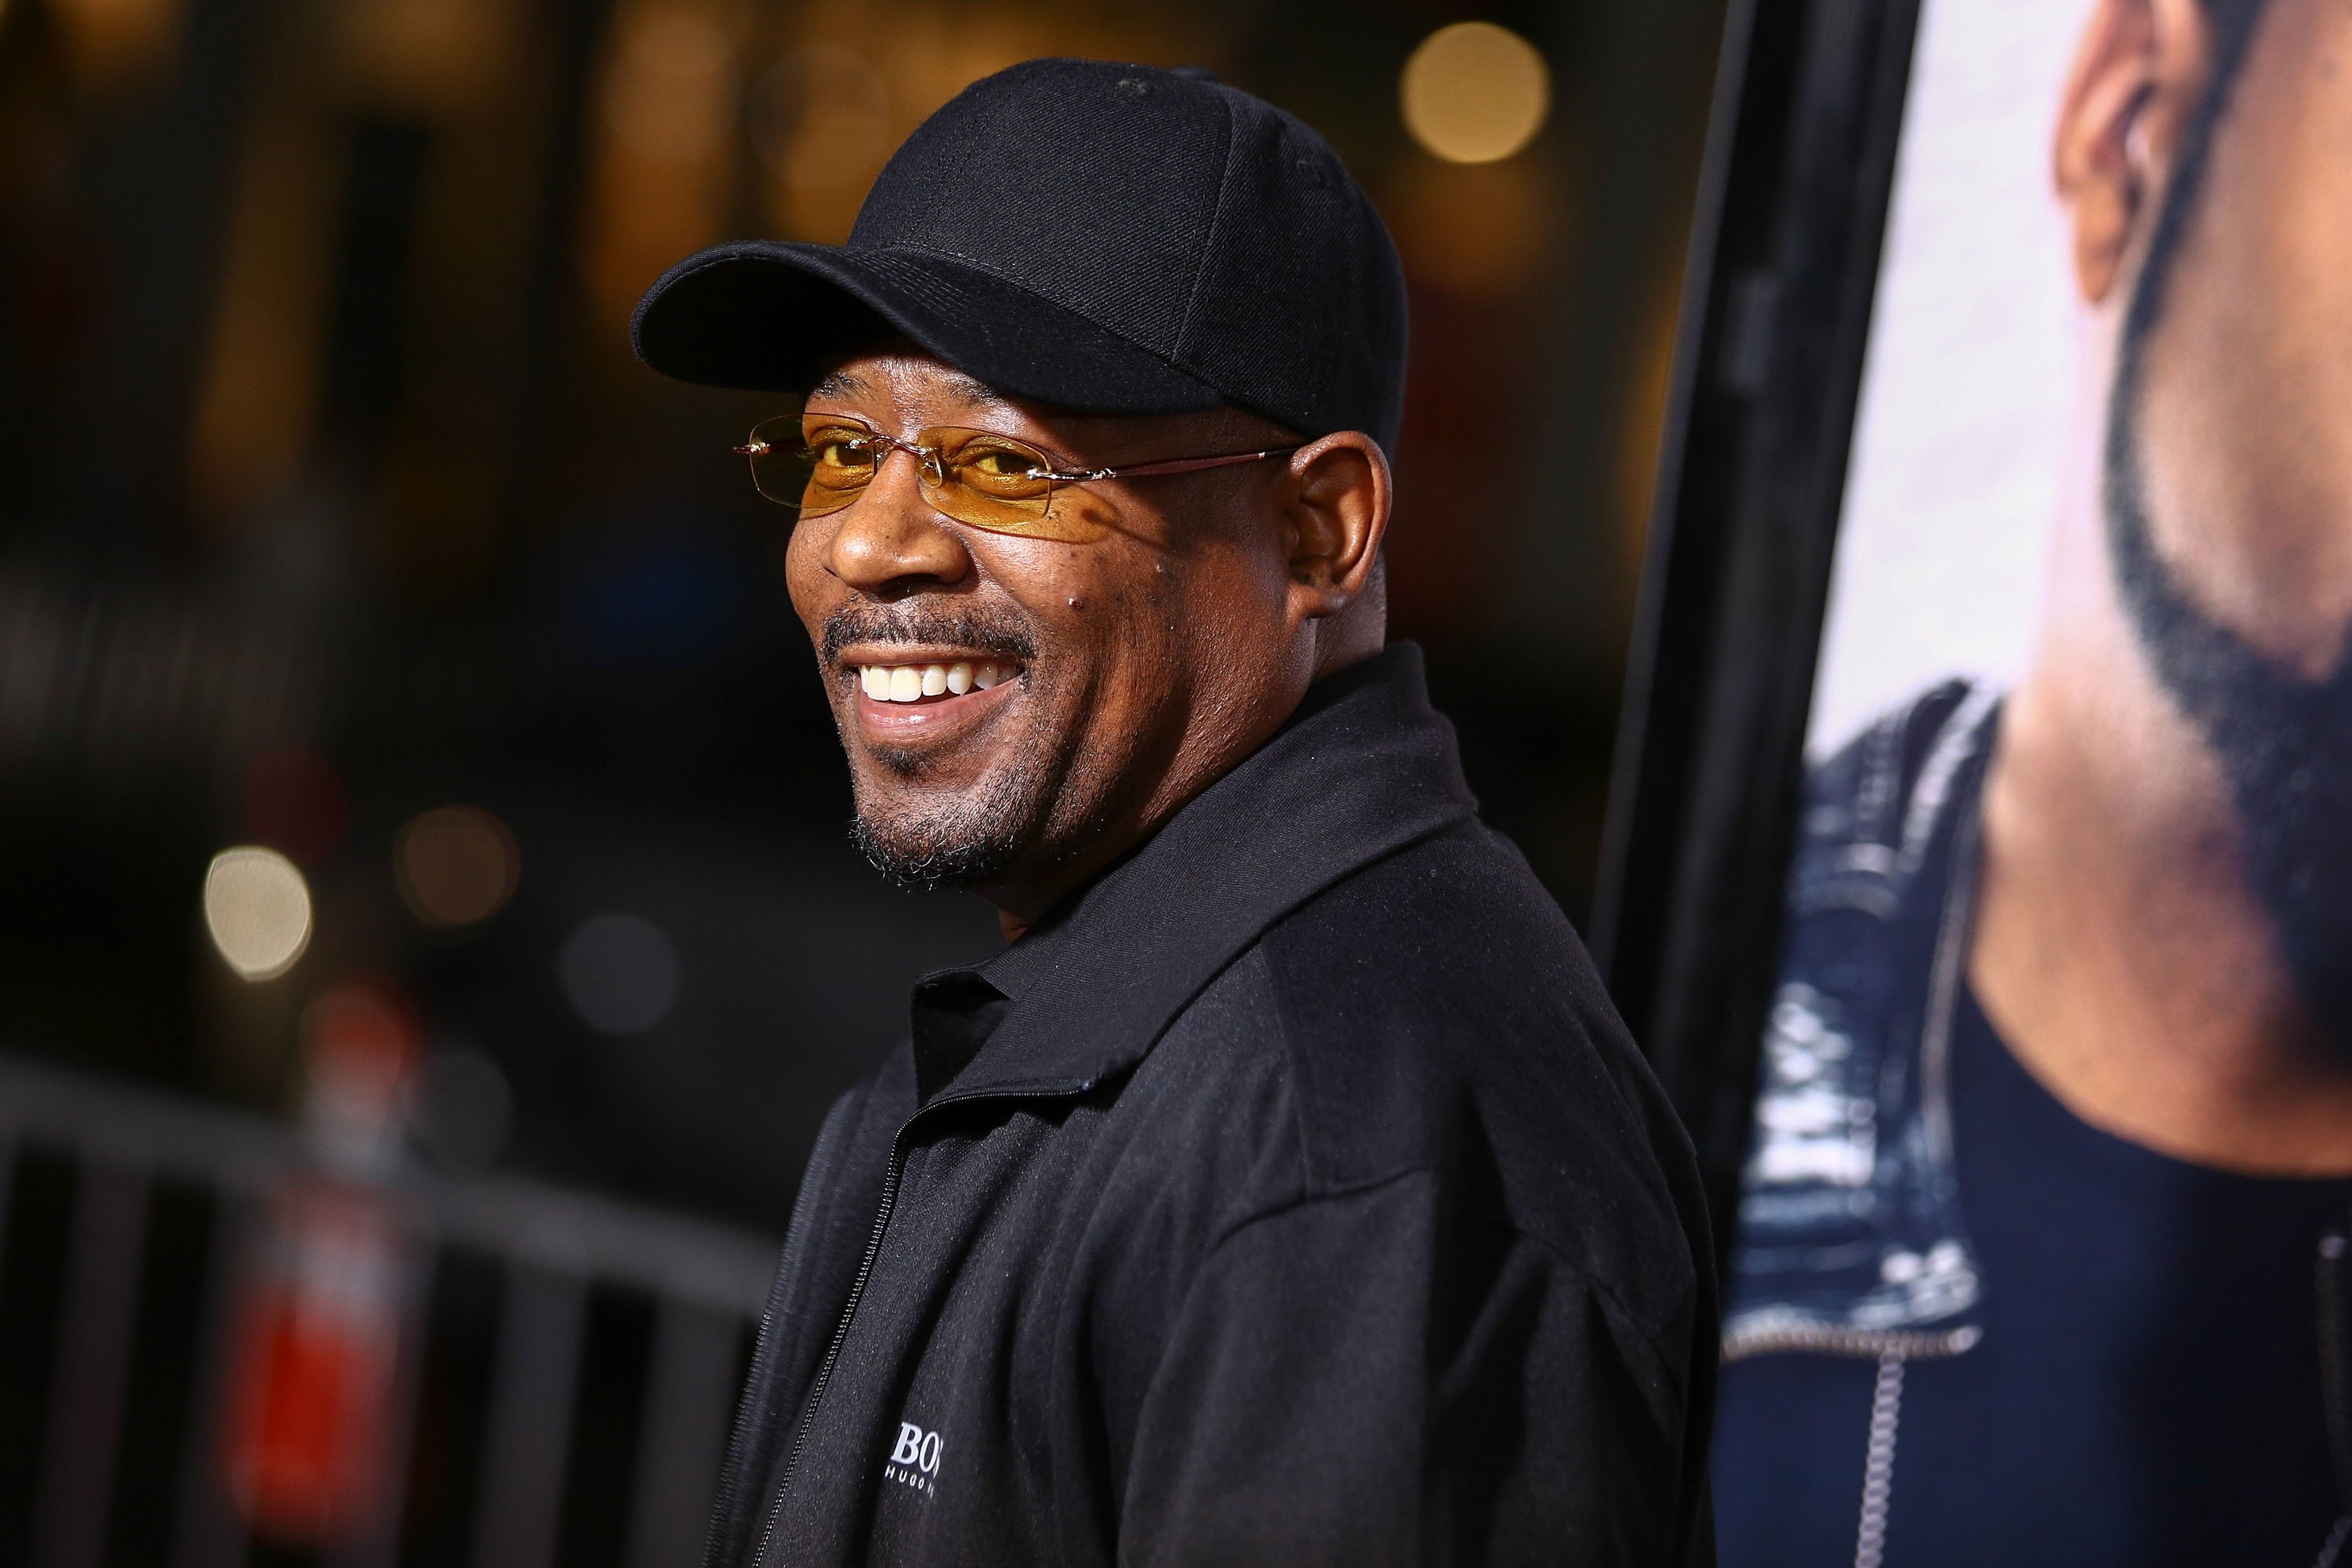 Actor Martin Lawrence attends the premiere of Universal Pictures' 'Ride Along' at TCL Chinese Theatre on January 13, 2014. | Photo: Getty Images